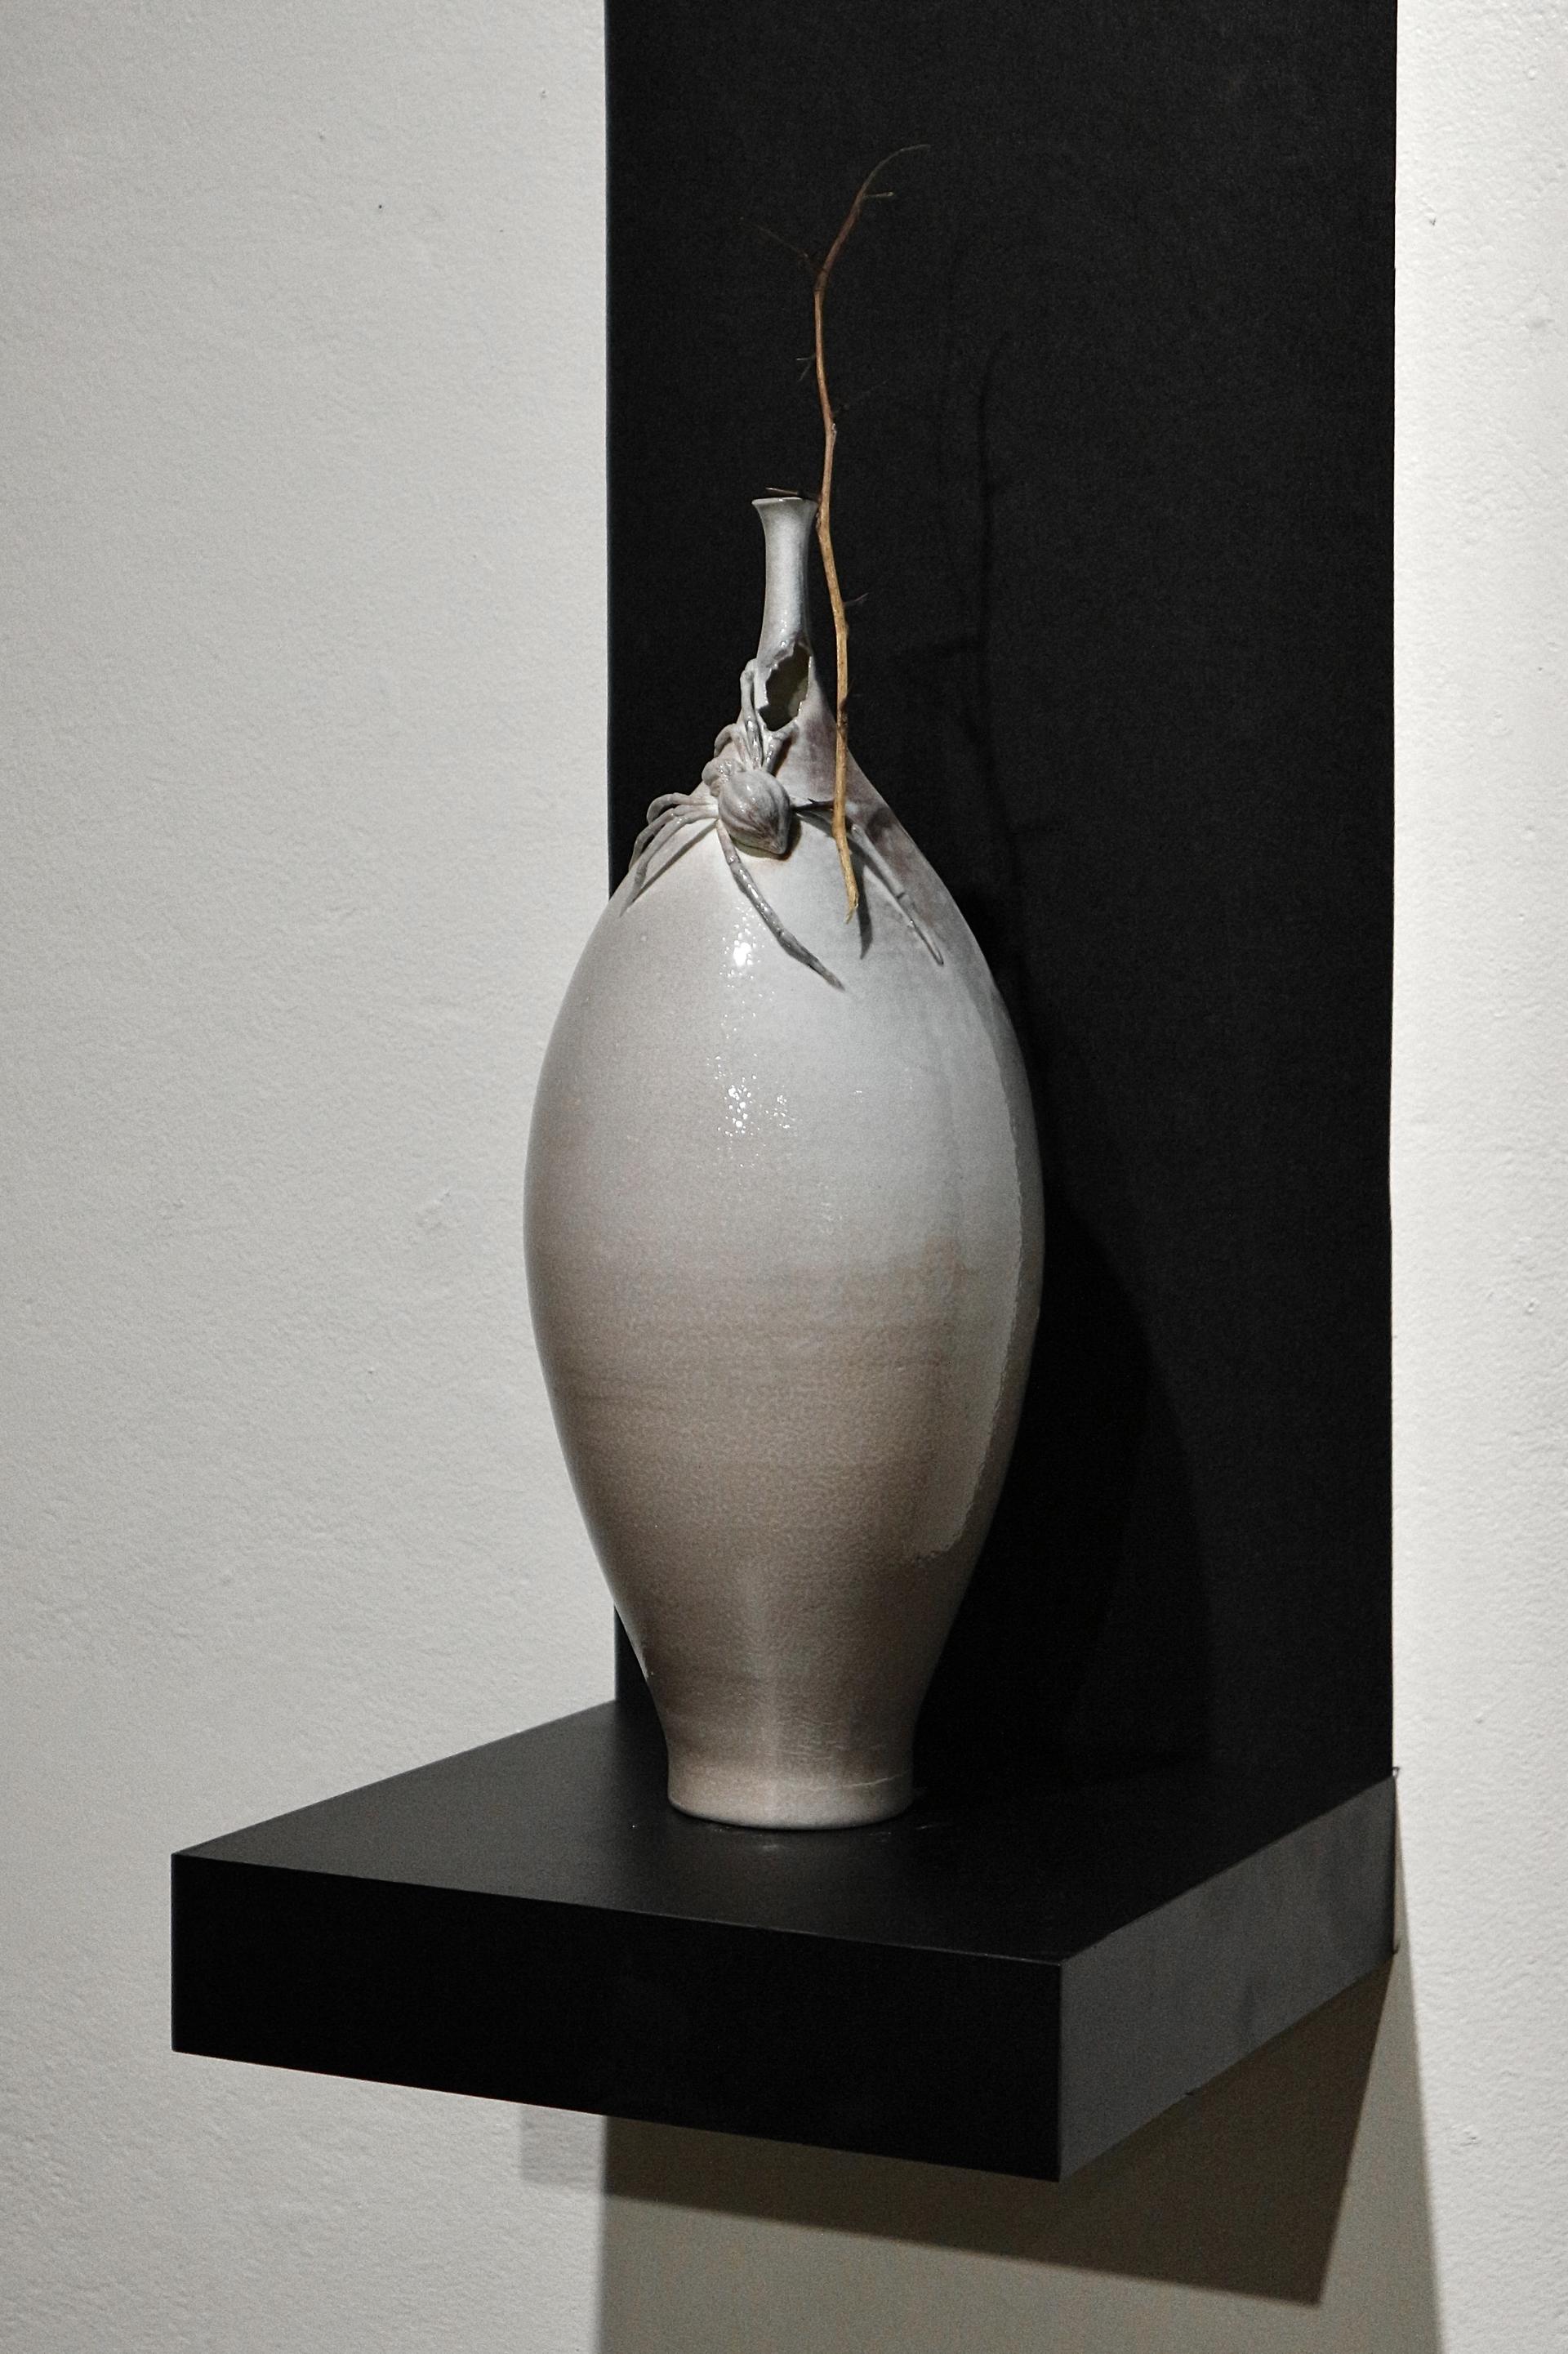 Soda-fired ceramic vessel with hand-sculpted spider around the neck.